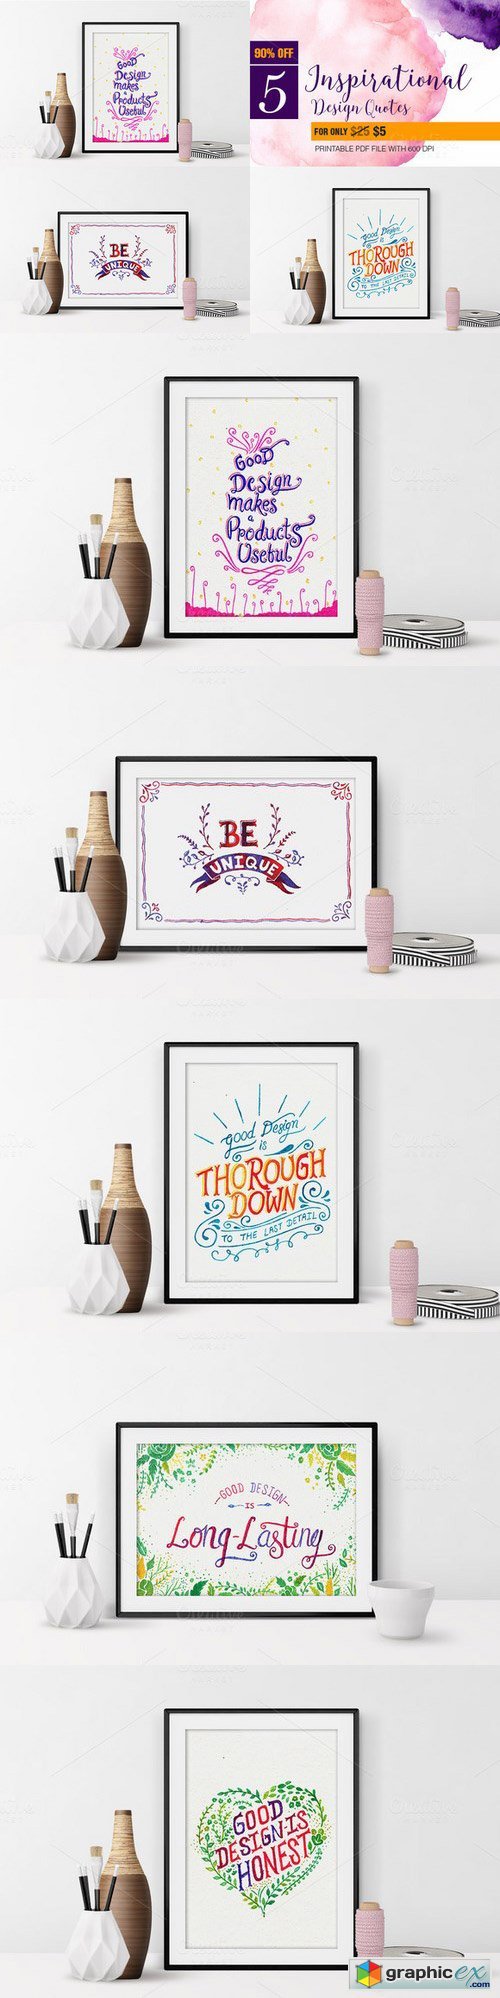 Inspirational Design Quote Poster